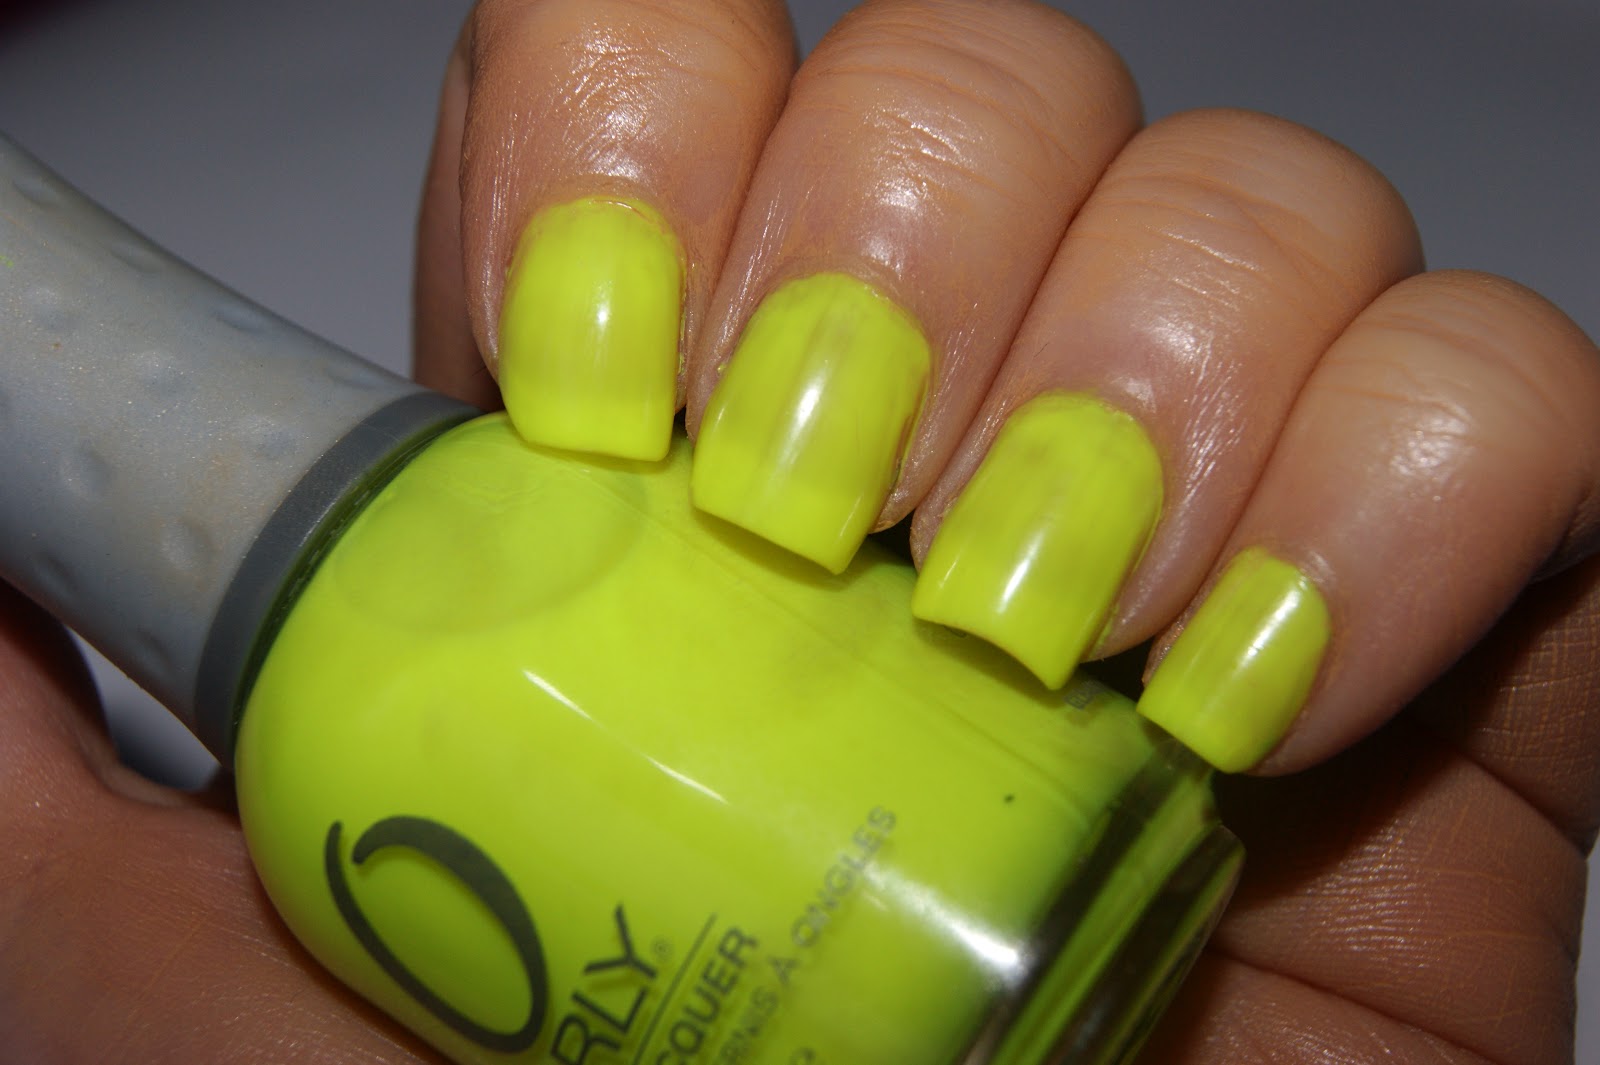 10. Orly Nail Lacquer in "Glowstick" - wide 8